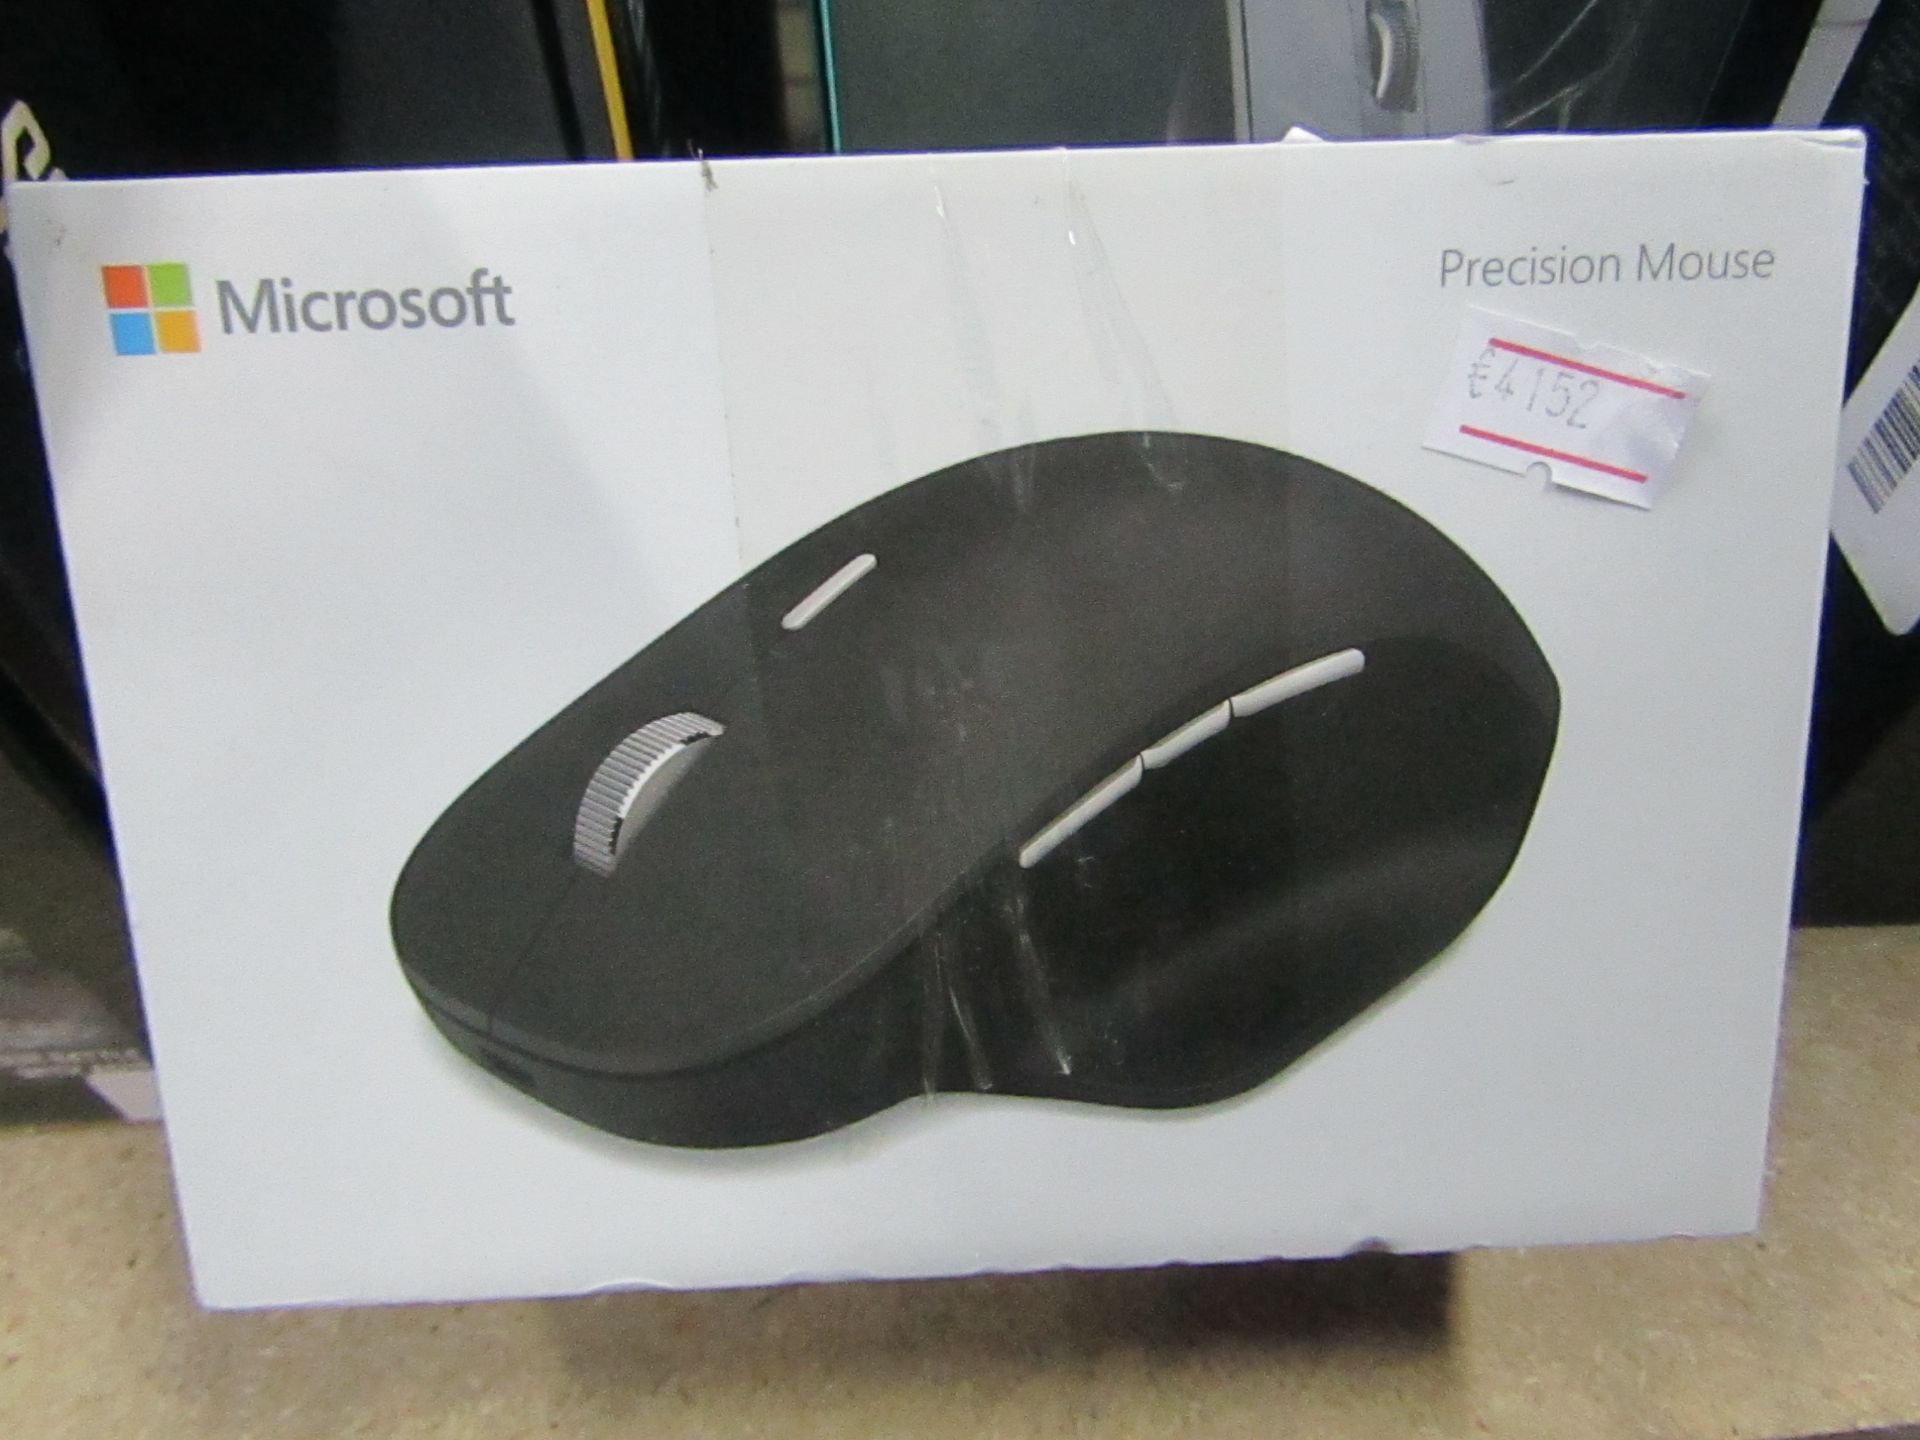 Microsoft precision mouse, untested and boxed.